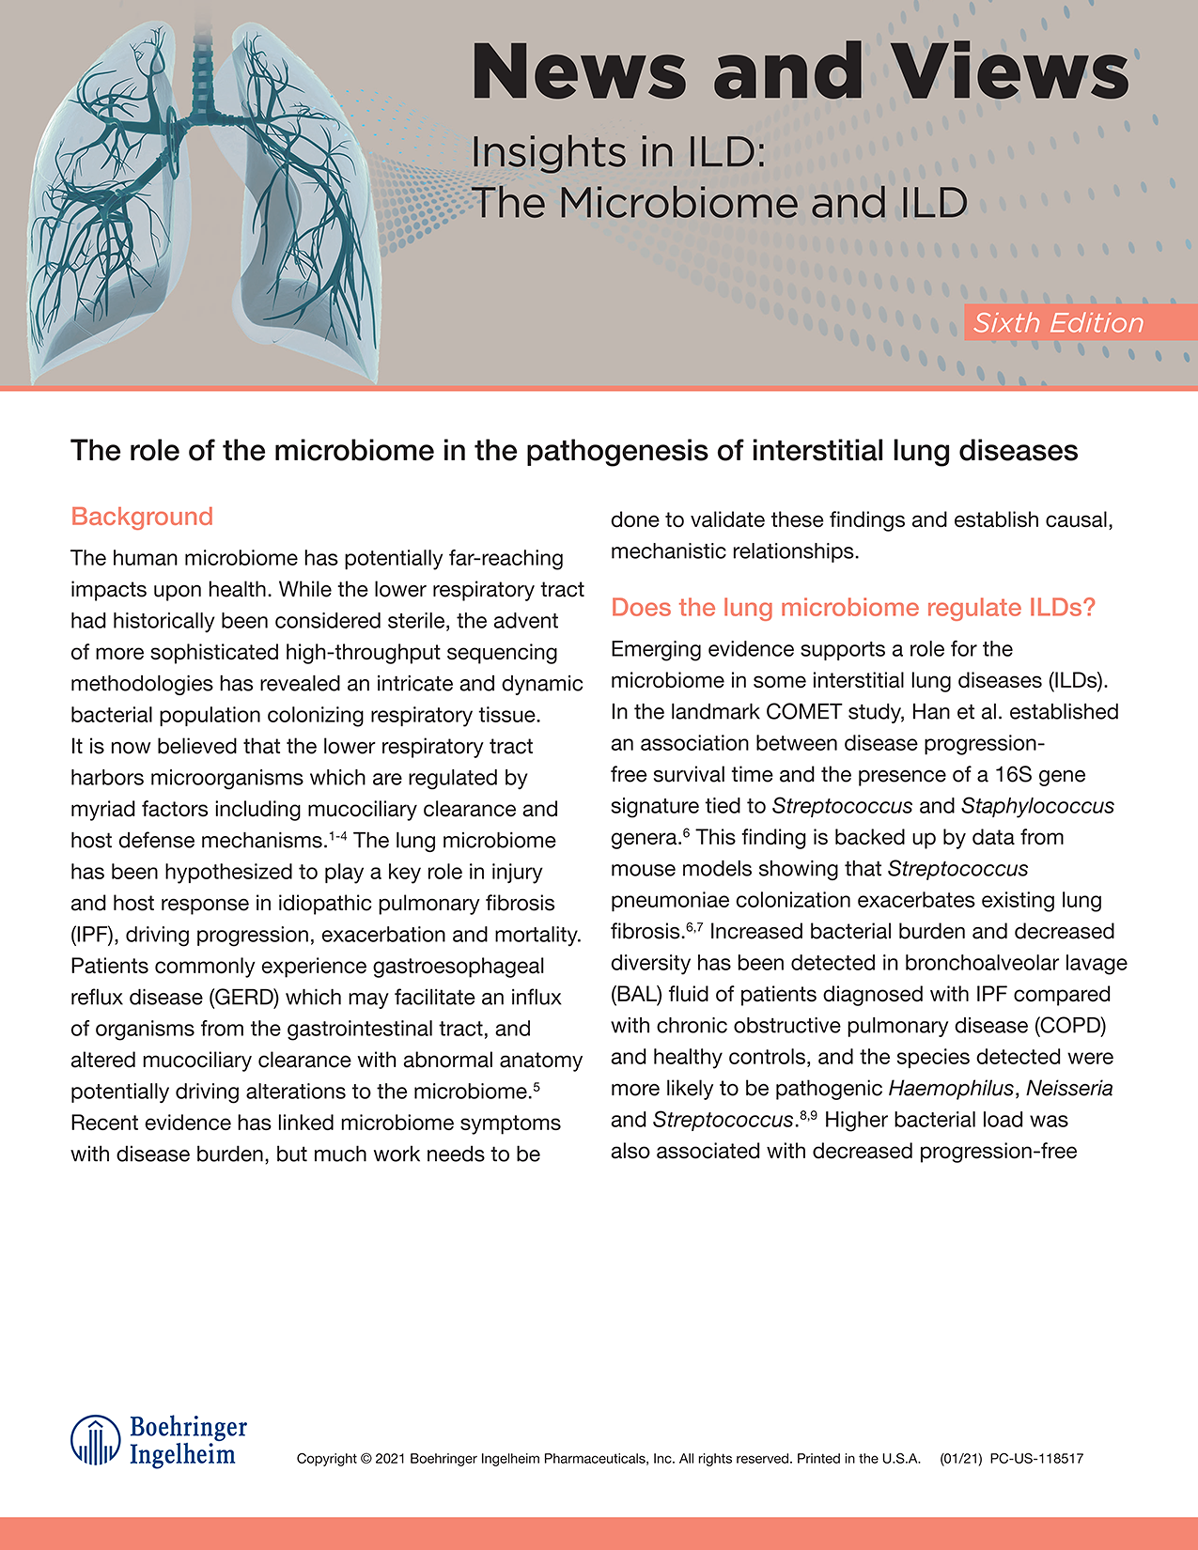 The Microbiome and Ild